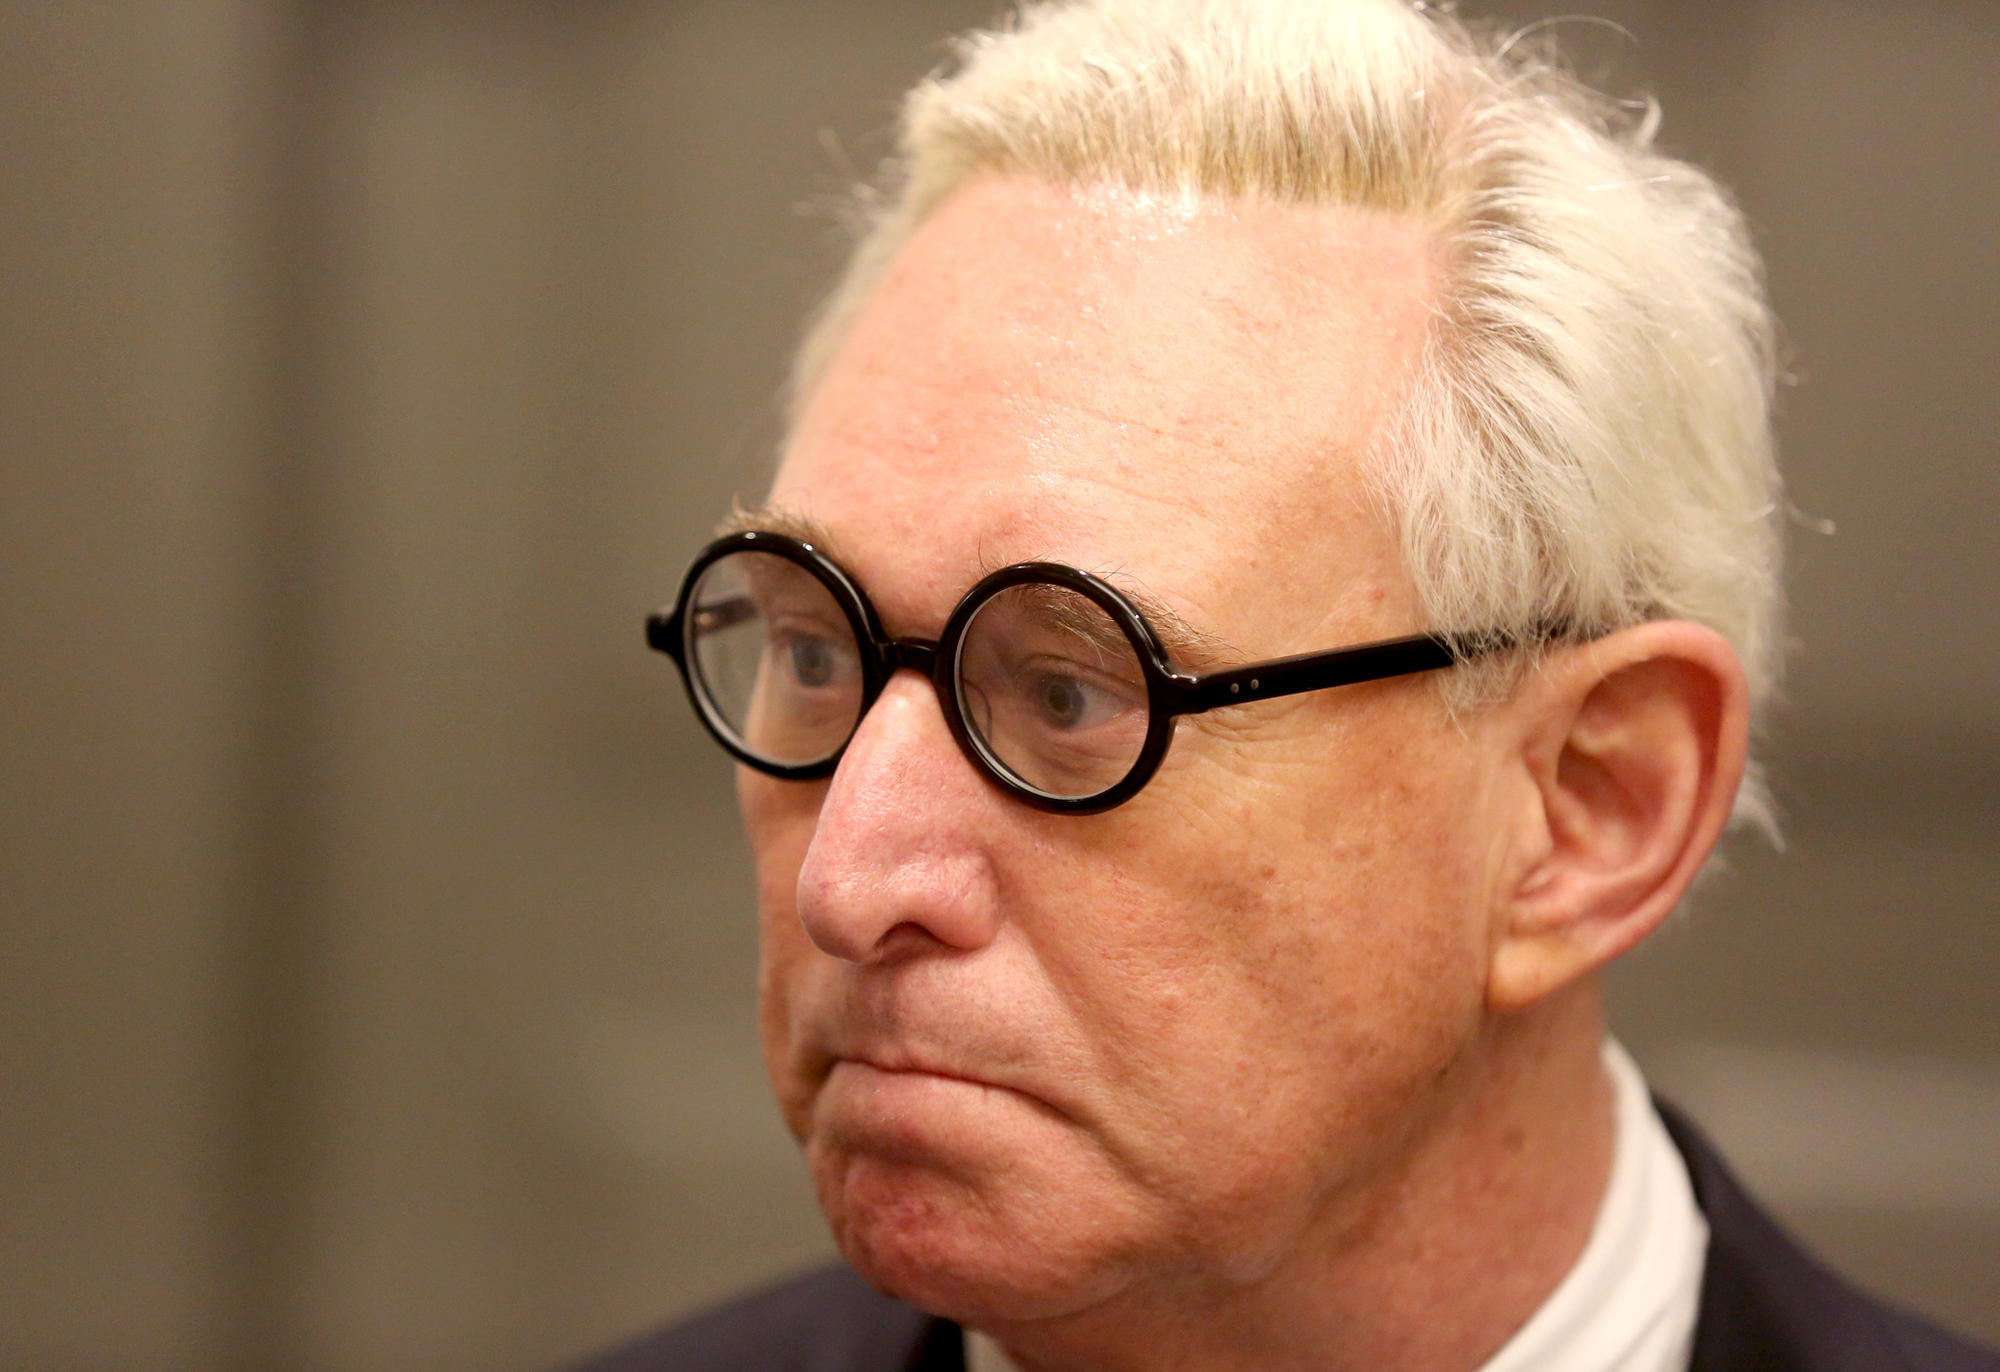 Trump ally Roger Stone kicked off Twitter after profanity-laced rant at CNN reporters ...2000 x 1372